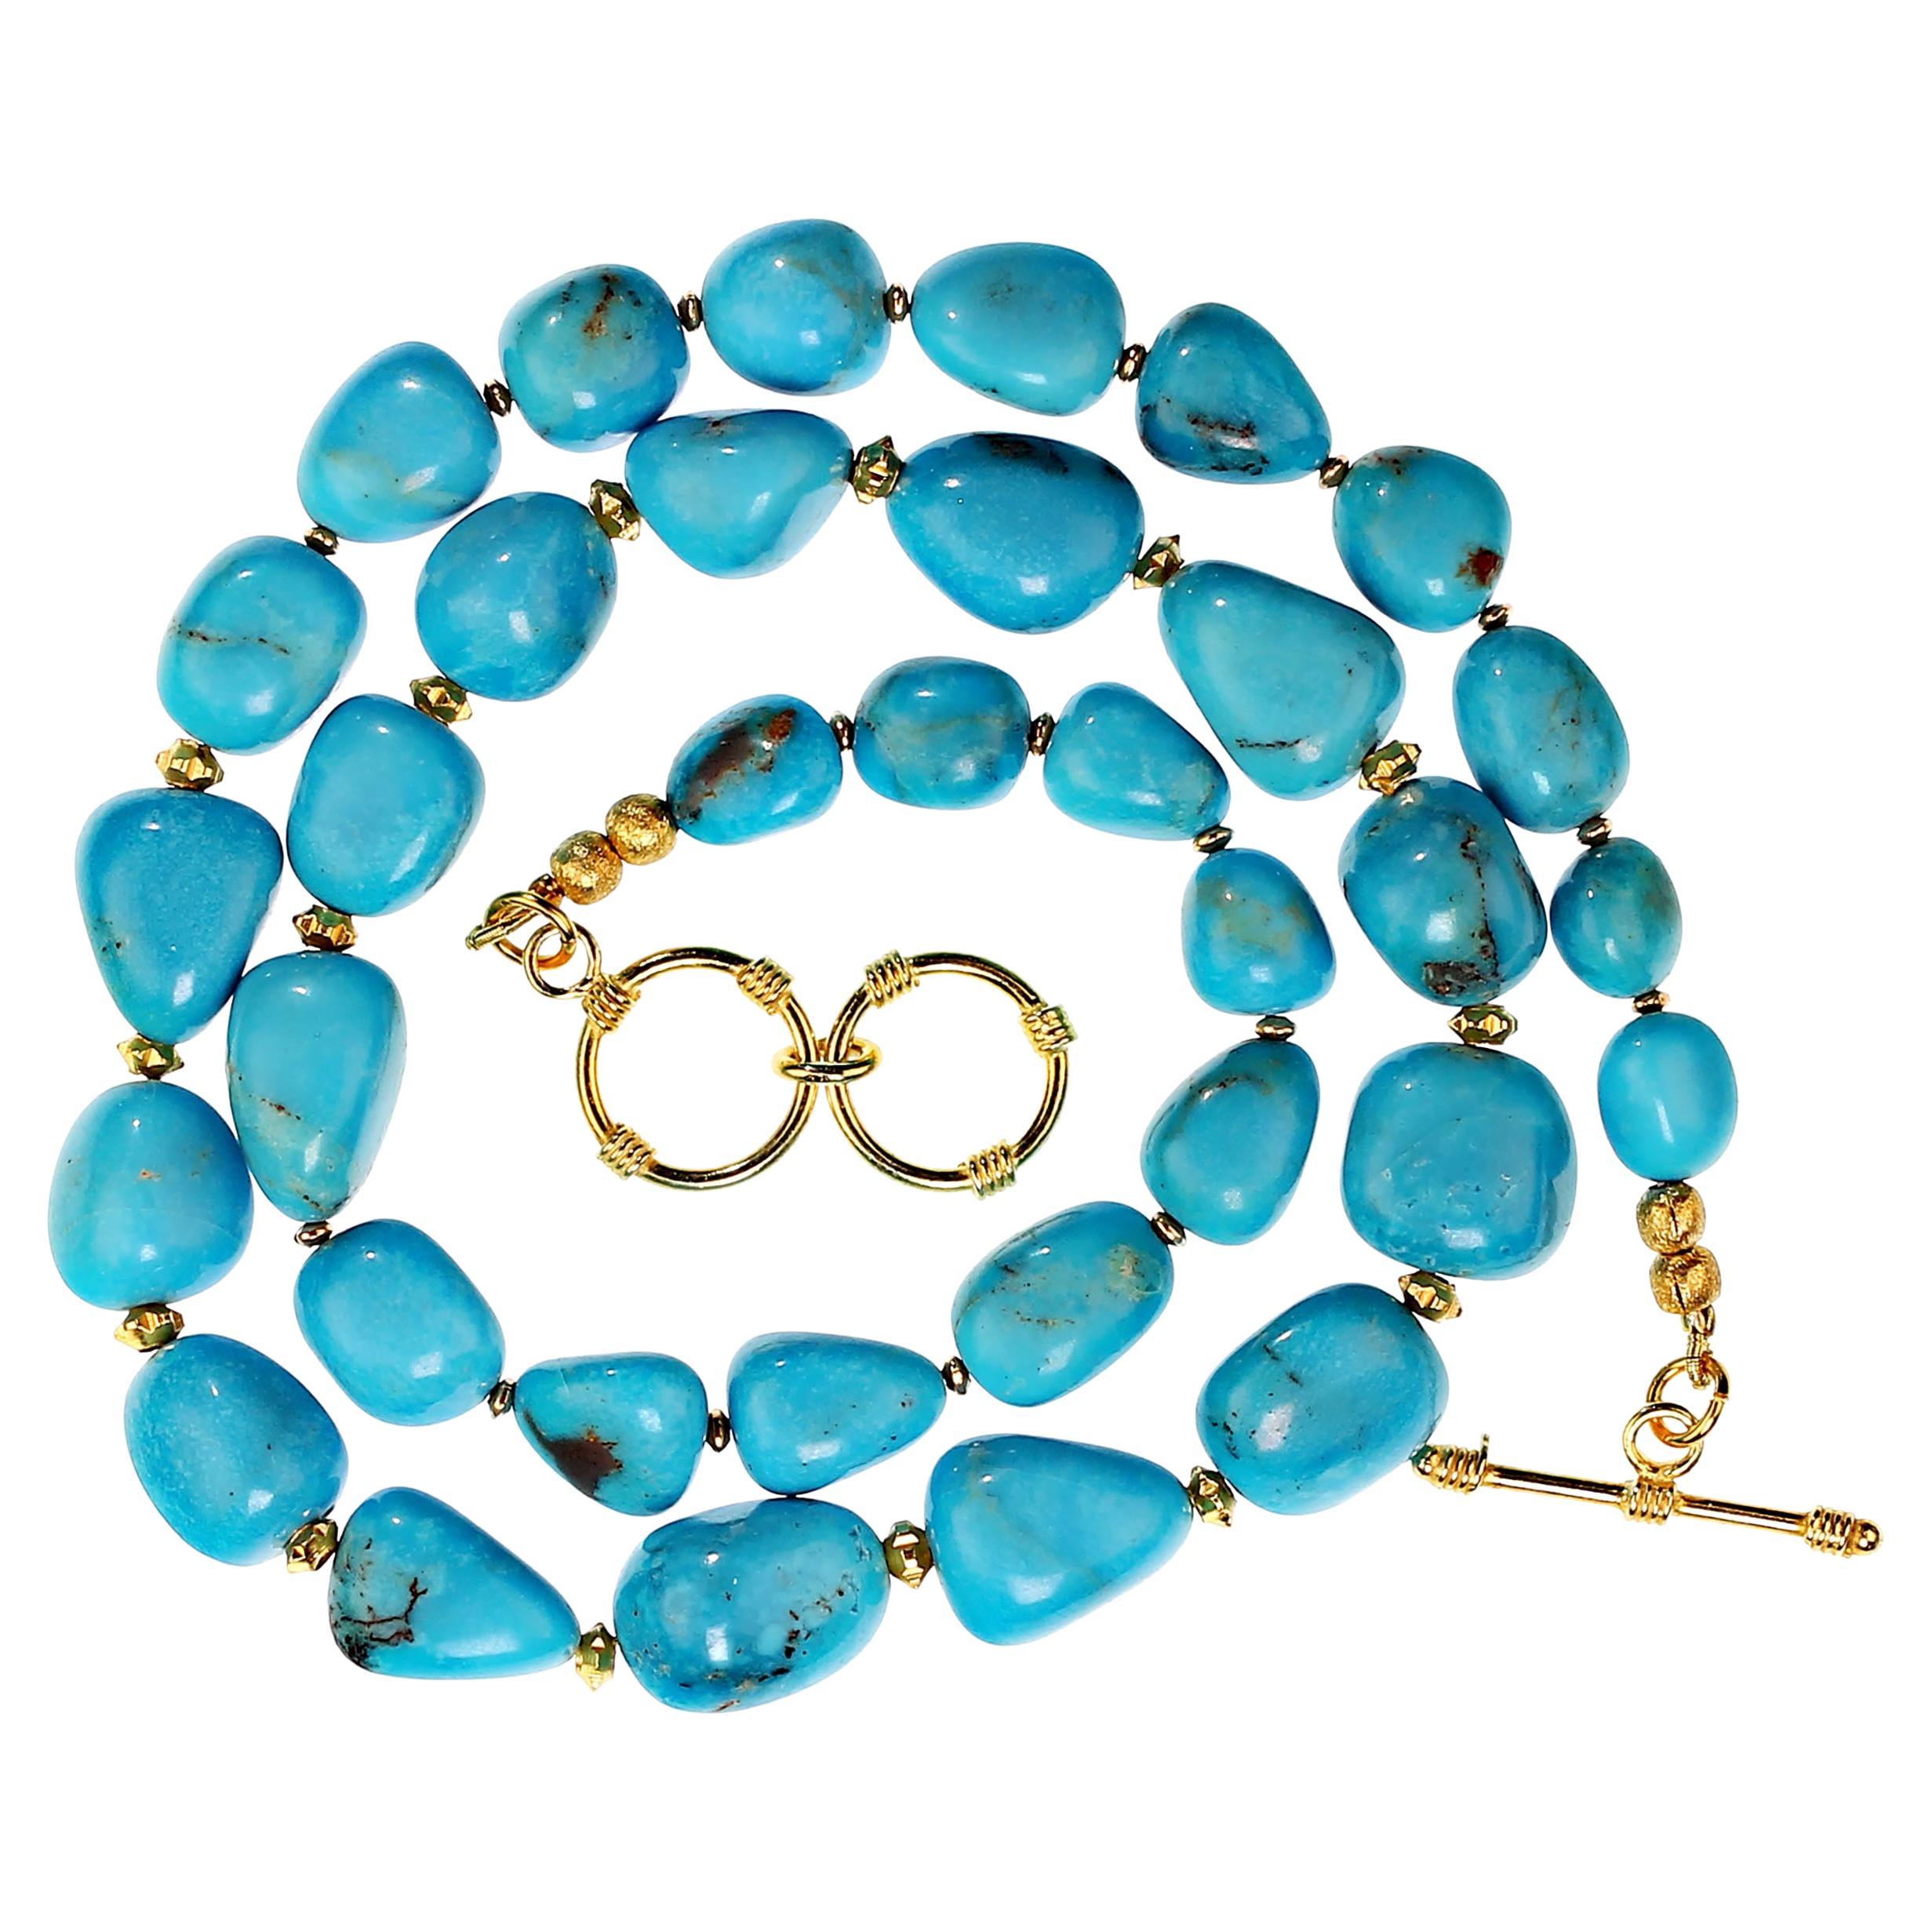 Stunning necklace of graduating Sleeping Beauty turquoise nuggets, 9-14mm.  These gorgeous nuggets have 22k gold plated accents and a gold-plated expandable toggle clasp. The necklace expands 21-22 inches.  MN2313